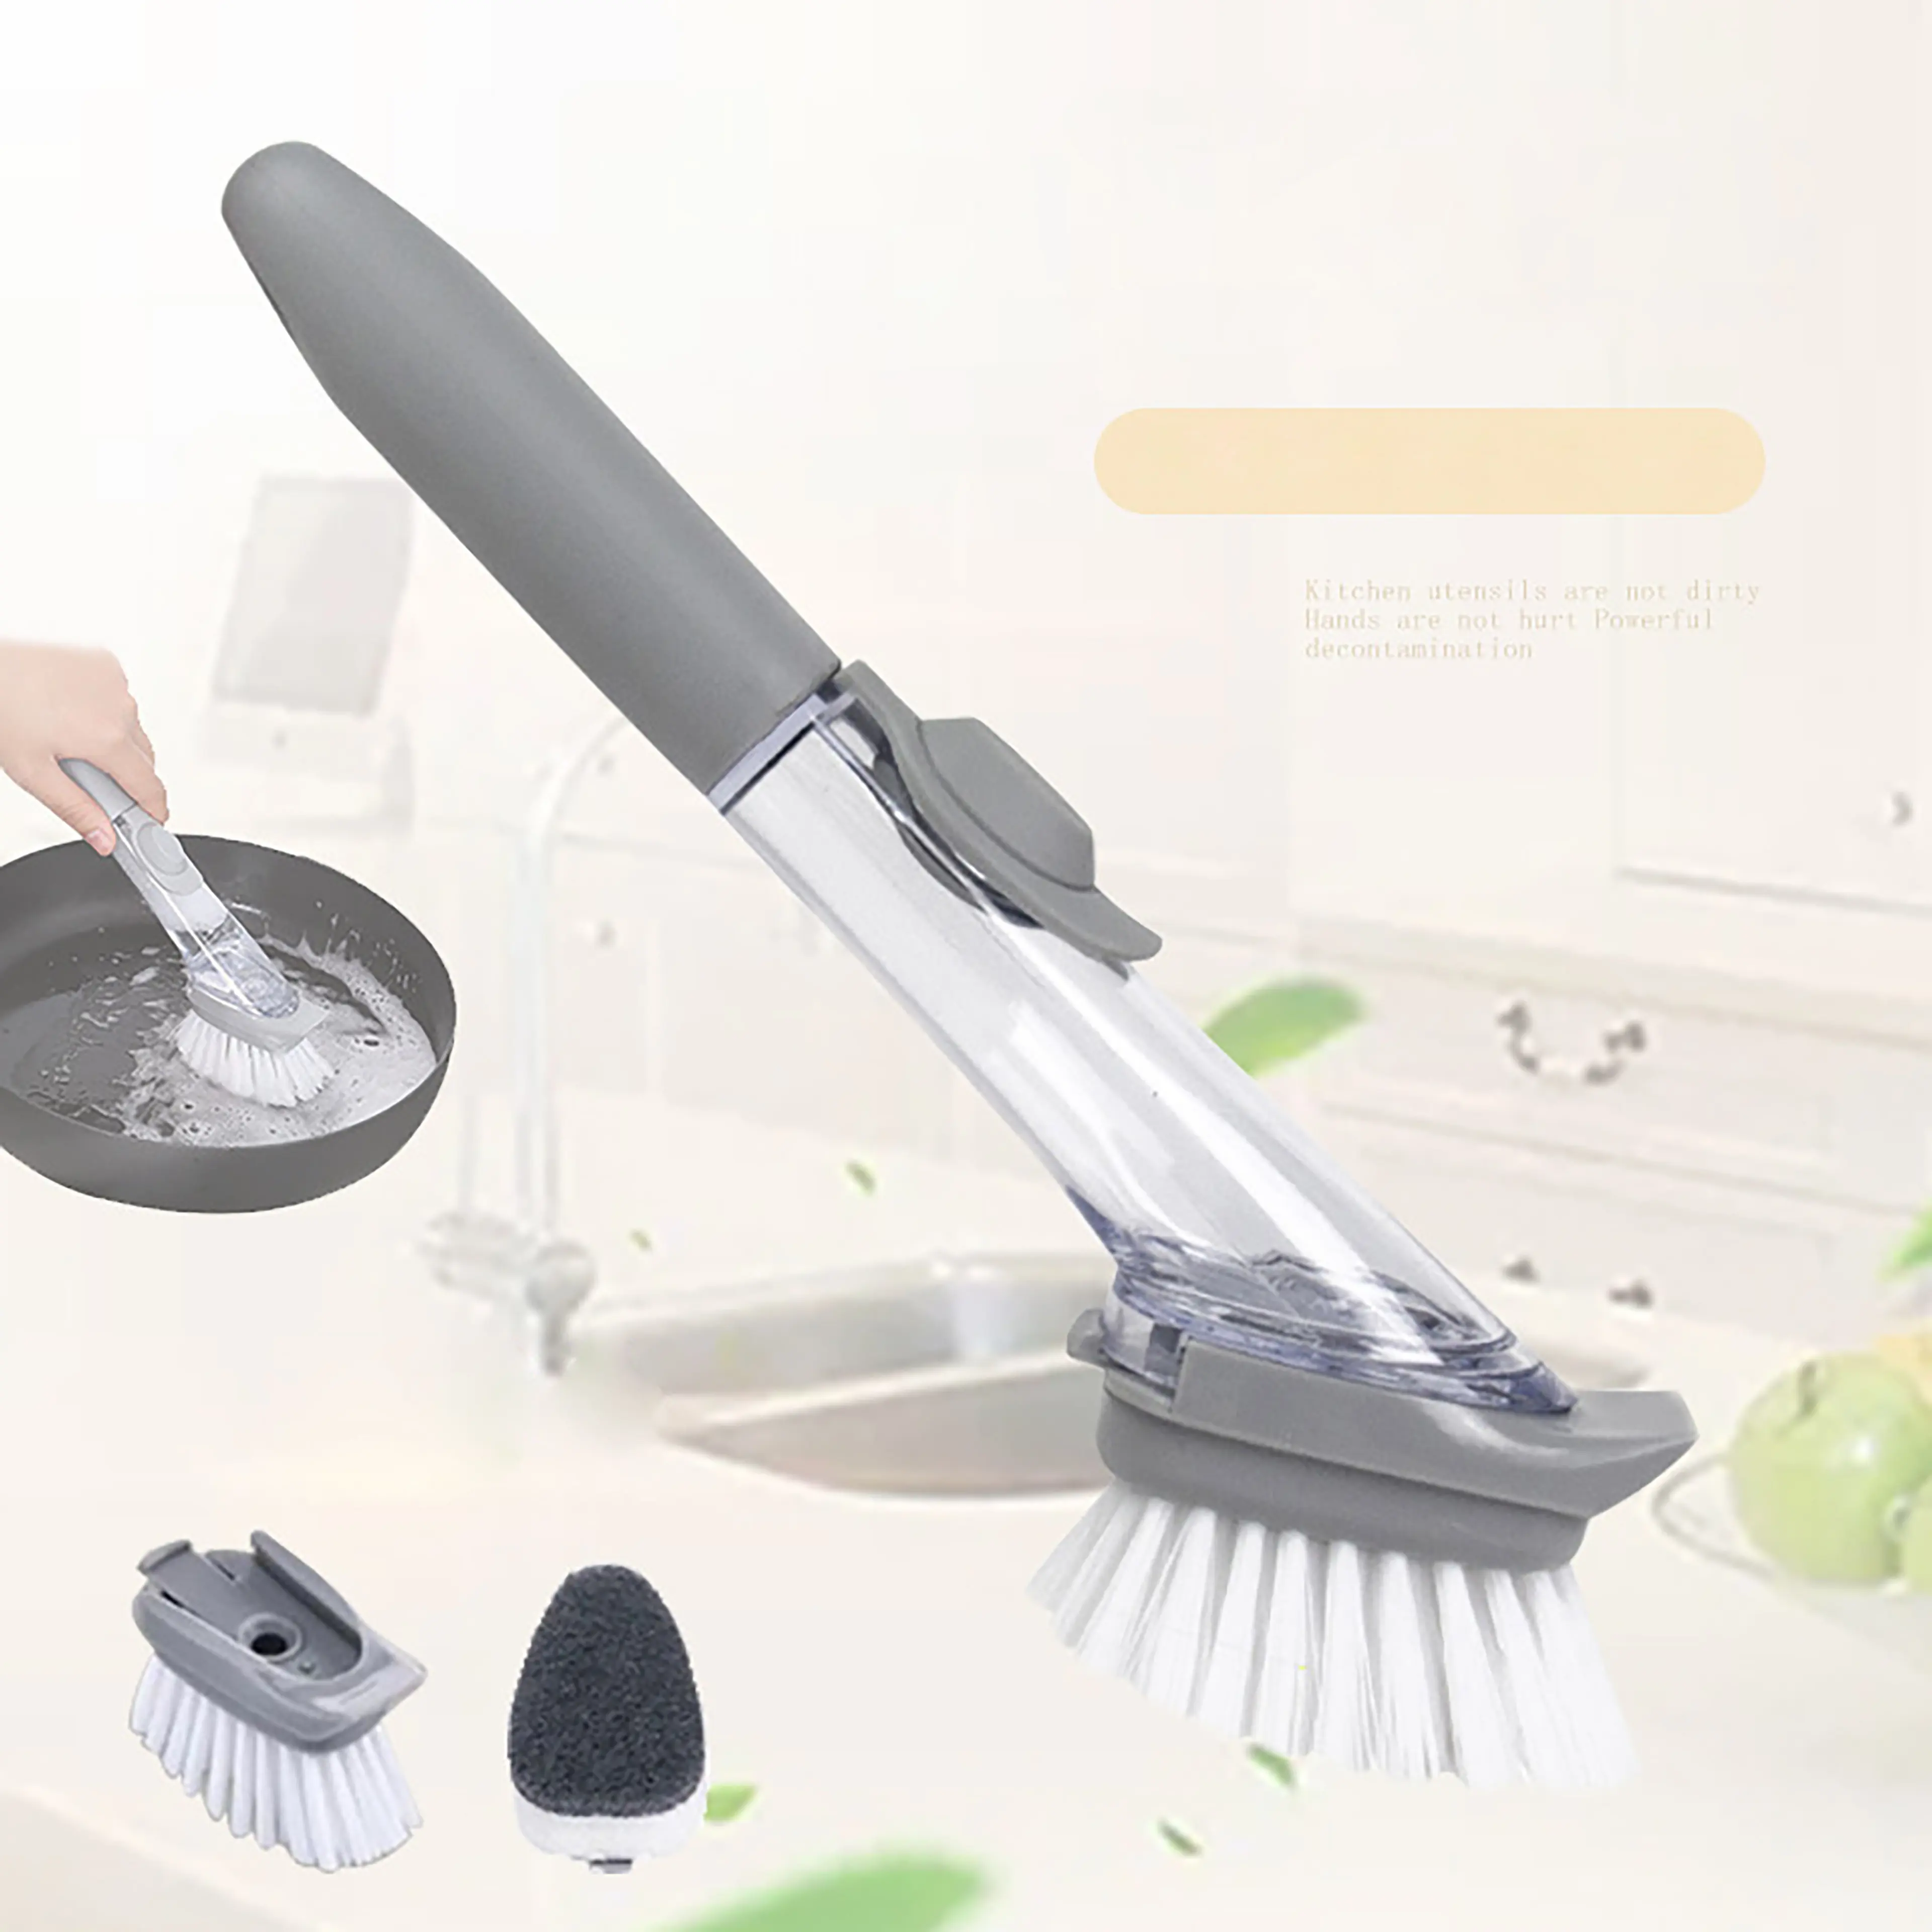 Hot Sale Household Cleaning Tools Plastic Kitchen Cleaning Brushes Sponge brush Long-handed Automatic Liquid Dispenser Cleaner